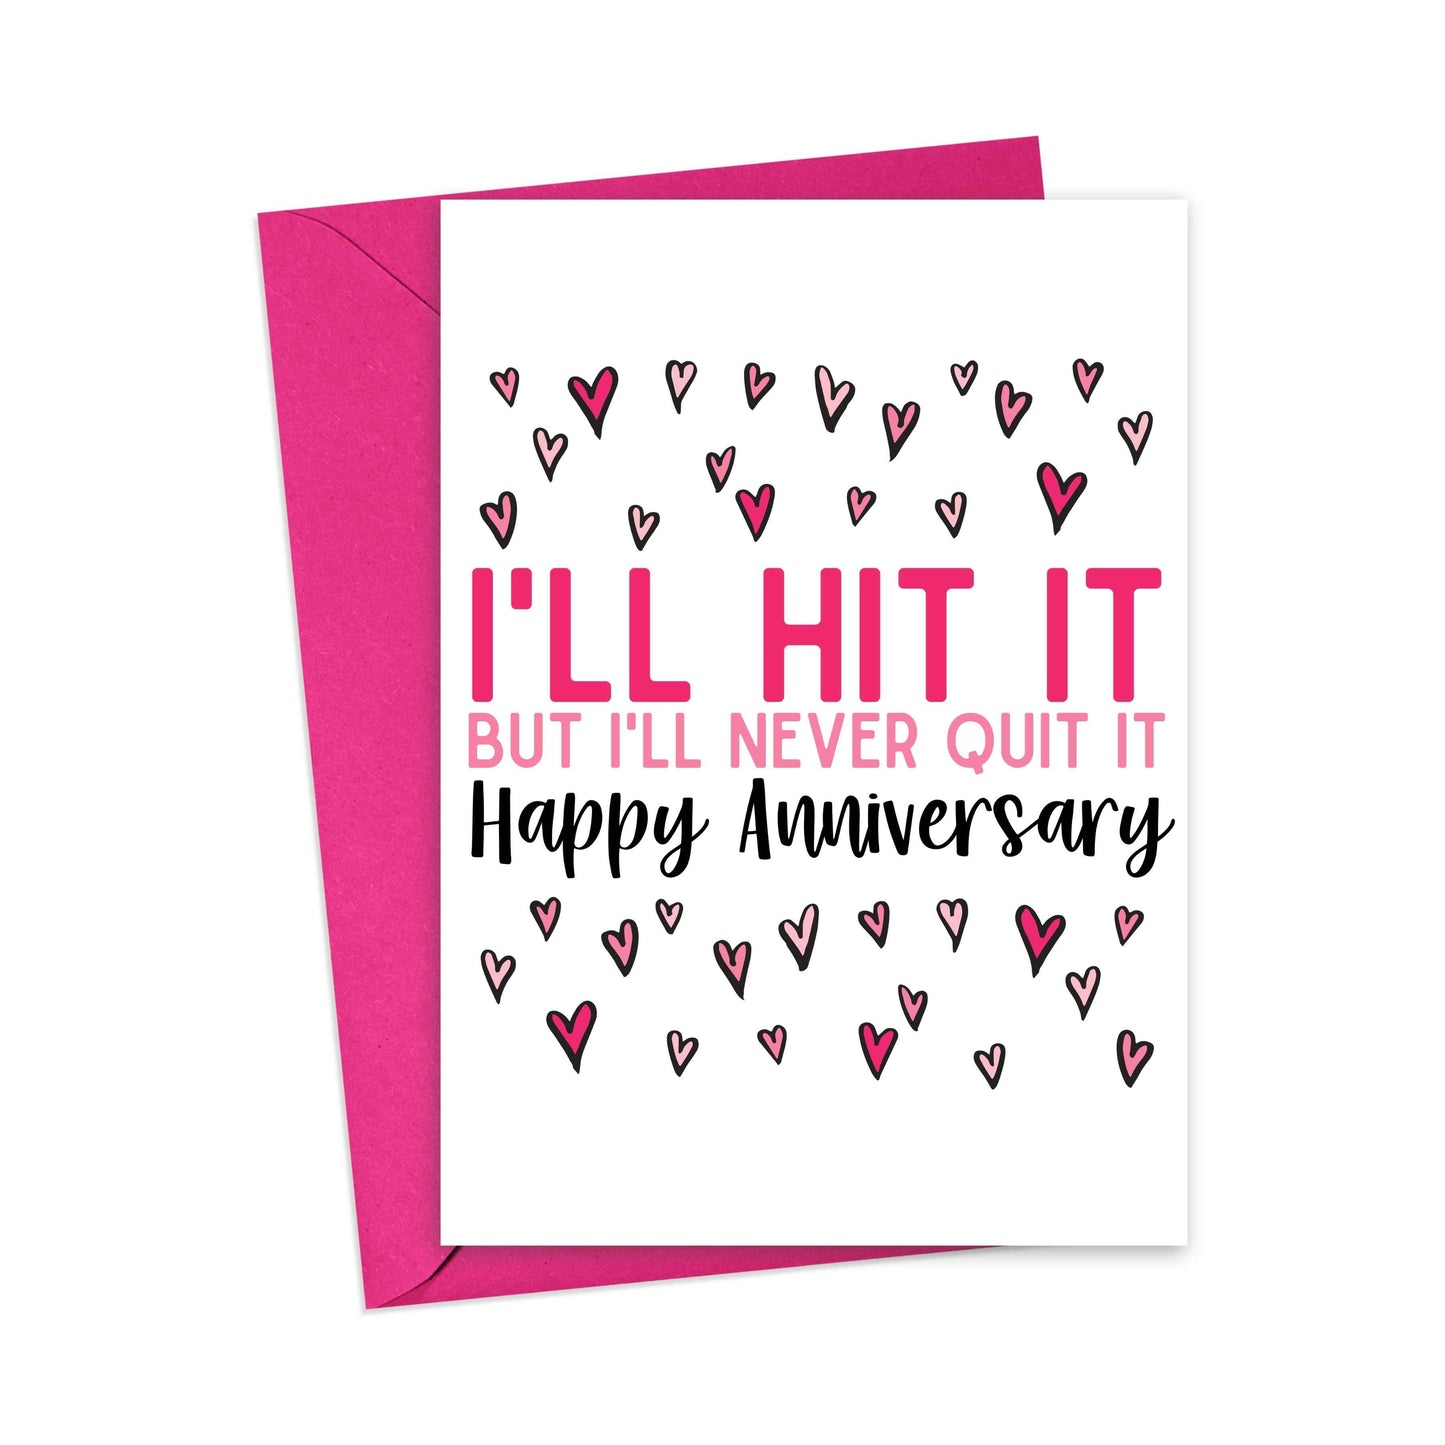 R is for Robo - Funny Anniversary Card - Happy Anniversary Greeting Cards